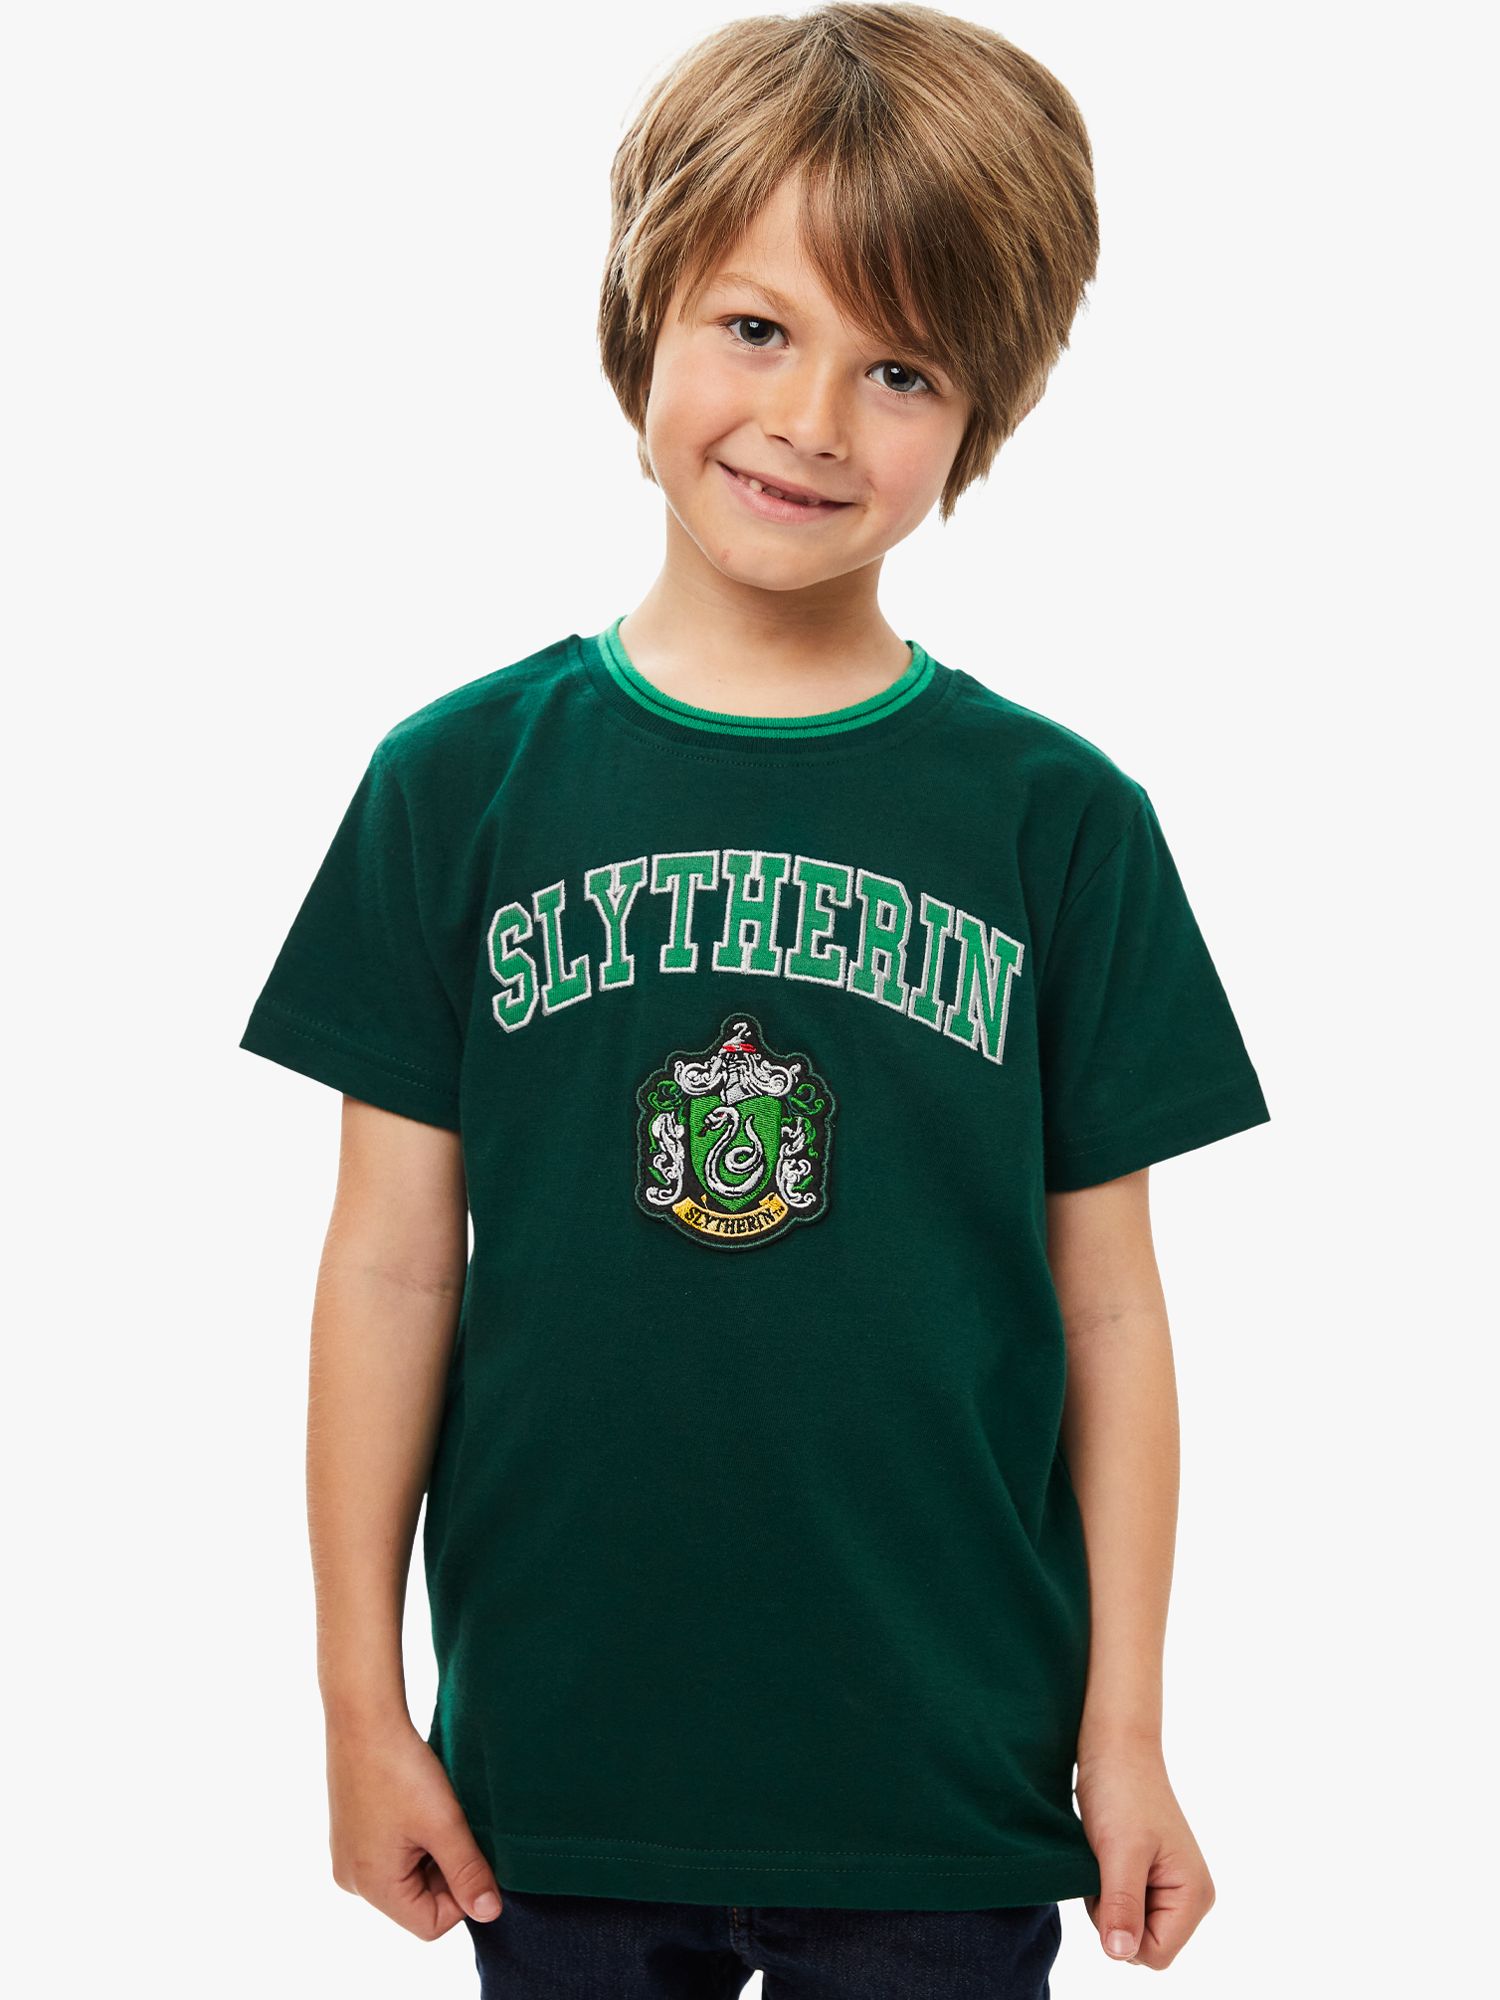 Fabric Flavours Kids' Harry Potter Slytherin Short Sleeve T-Shirt, Green, 3-4 years